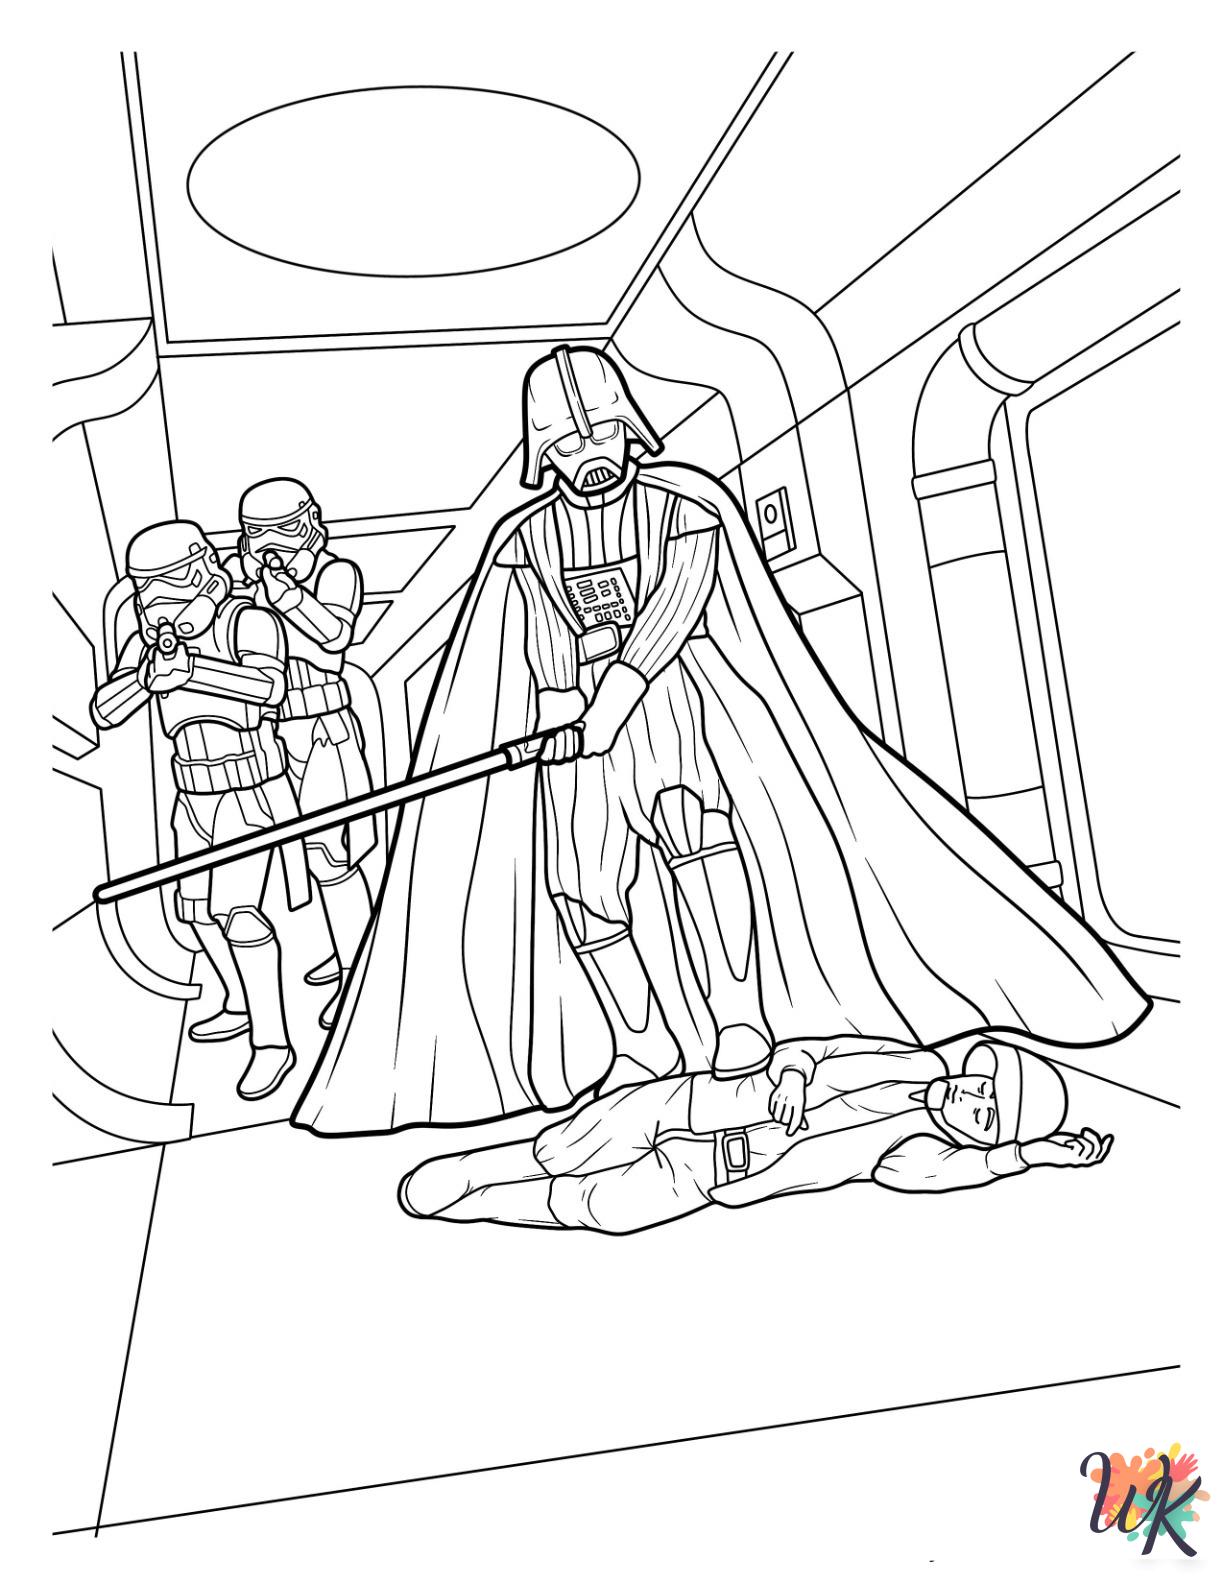 detailed Darth Vader coloring pages for adults